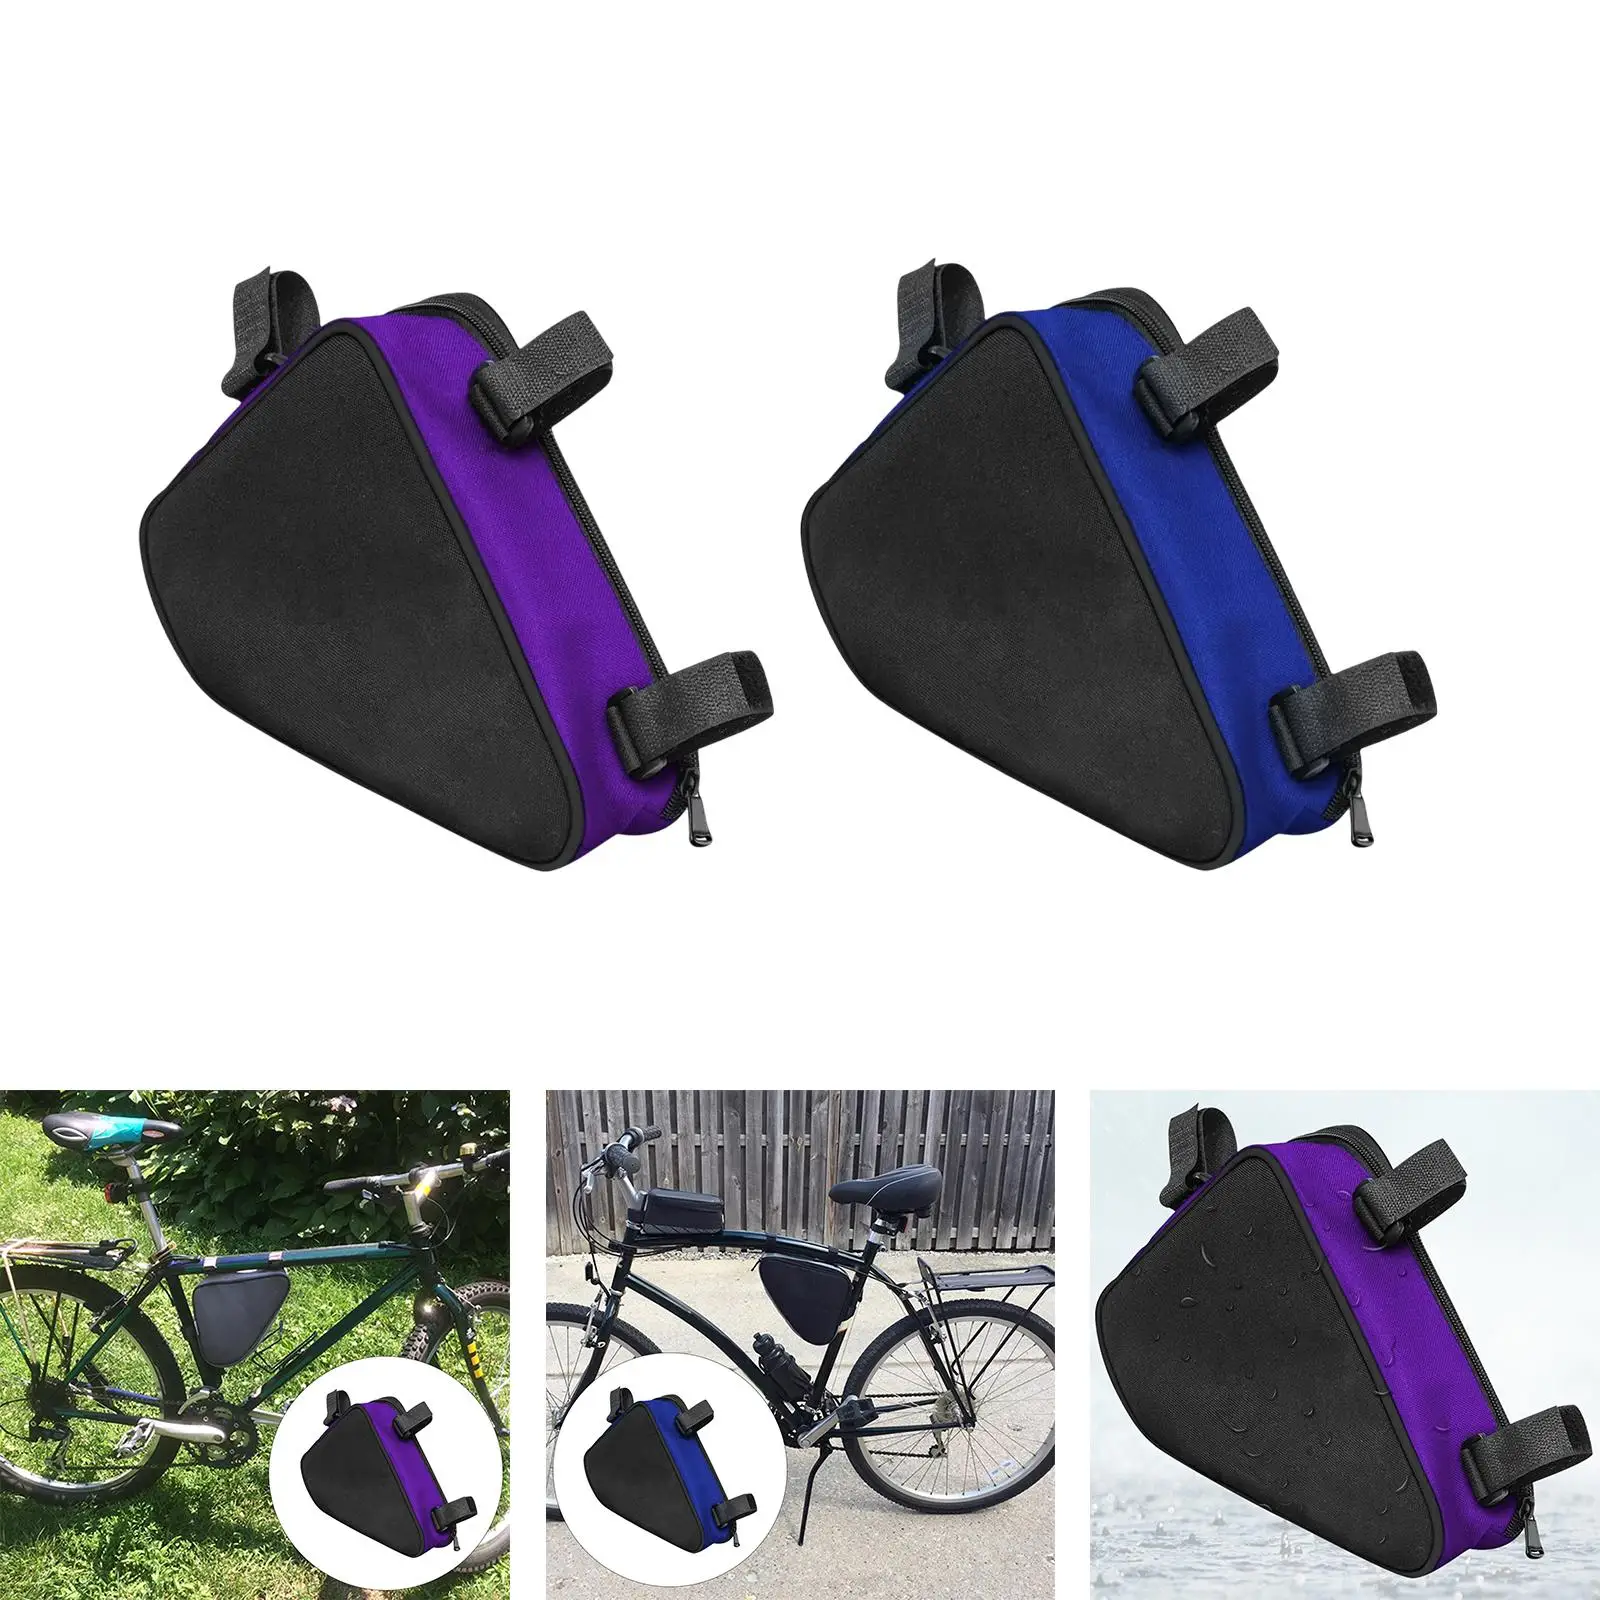 Bike Triangle Bag for Large Size Road Bike Pouch Bag Cycling Accessories Pack with Plenty of Space for Cellphone, Wallet, Tools